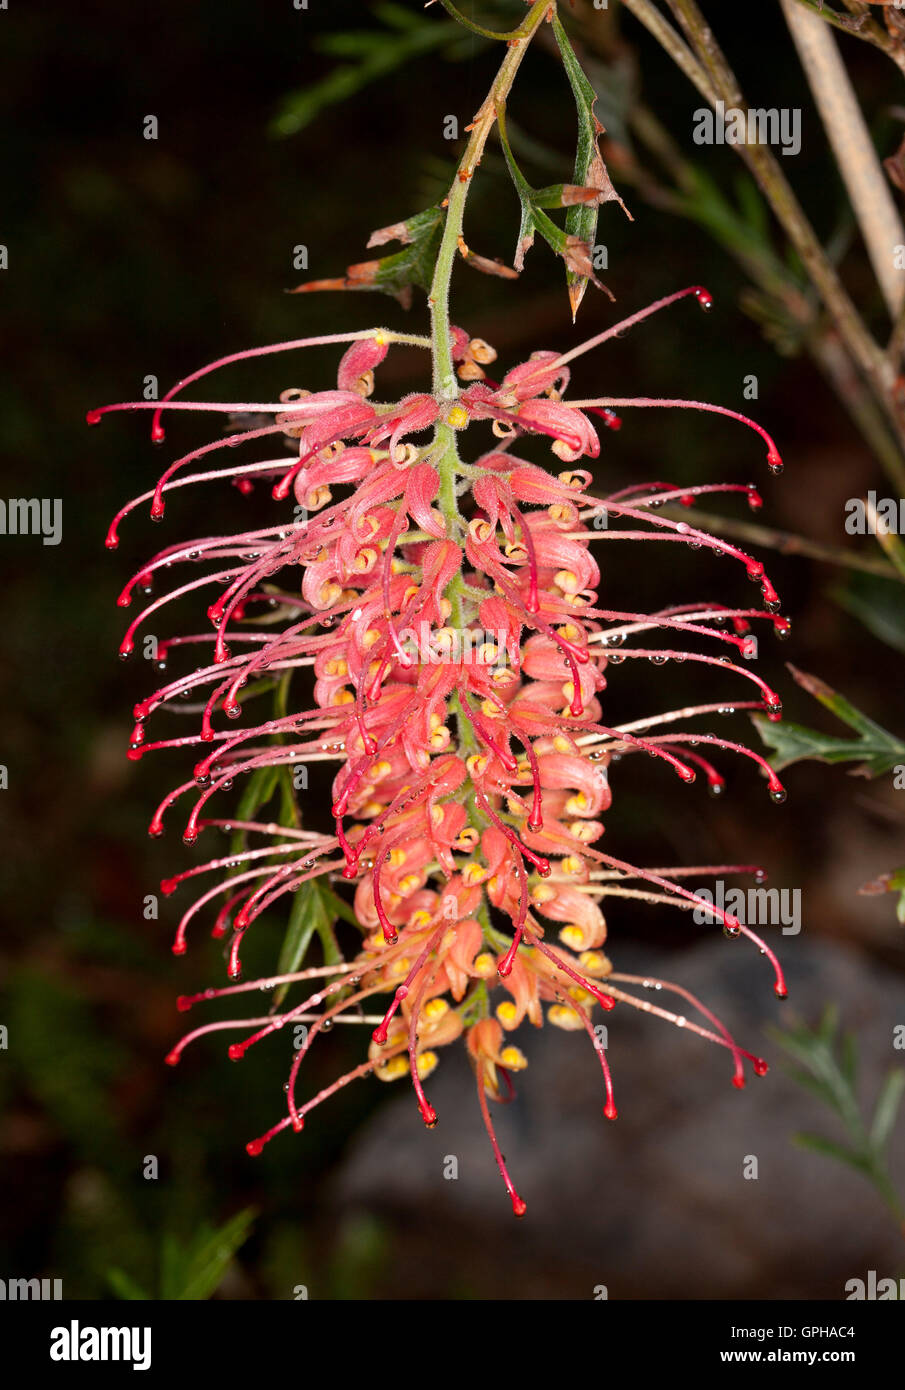 Spectacular deep pink / red & yellow flower with red stamens of Grevillea Firedrops Australian native plant on dark background Stock Photo